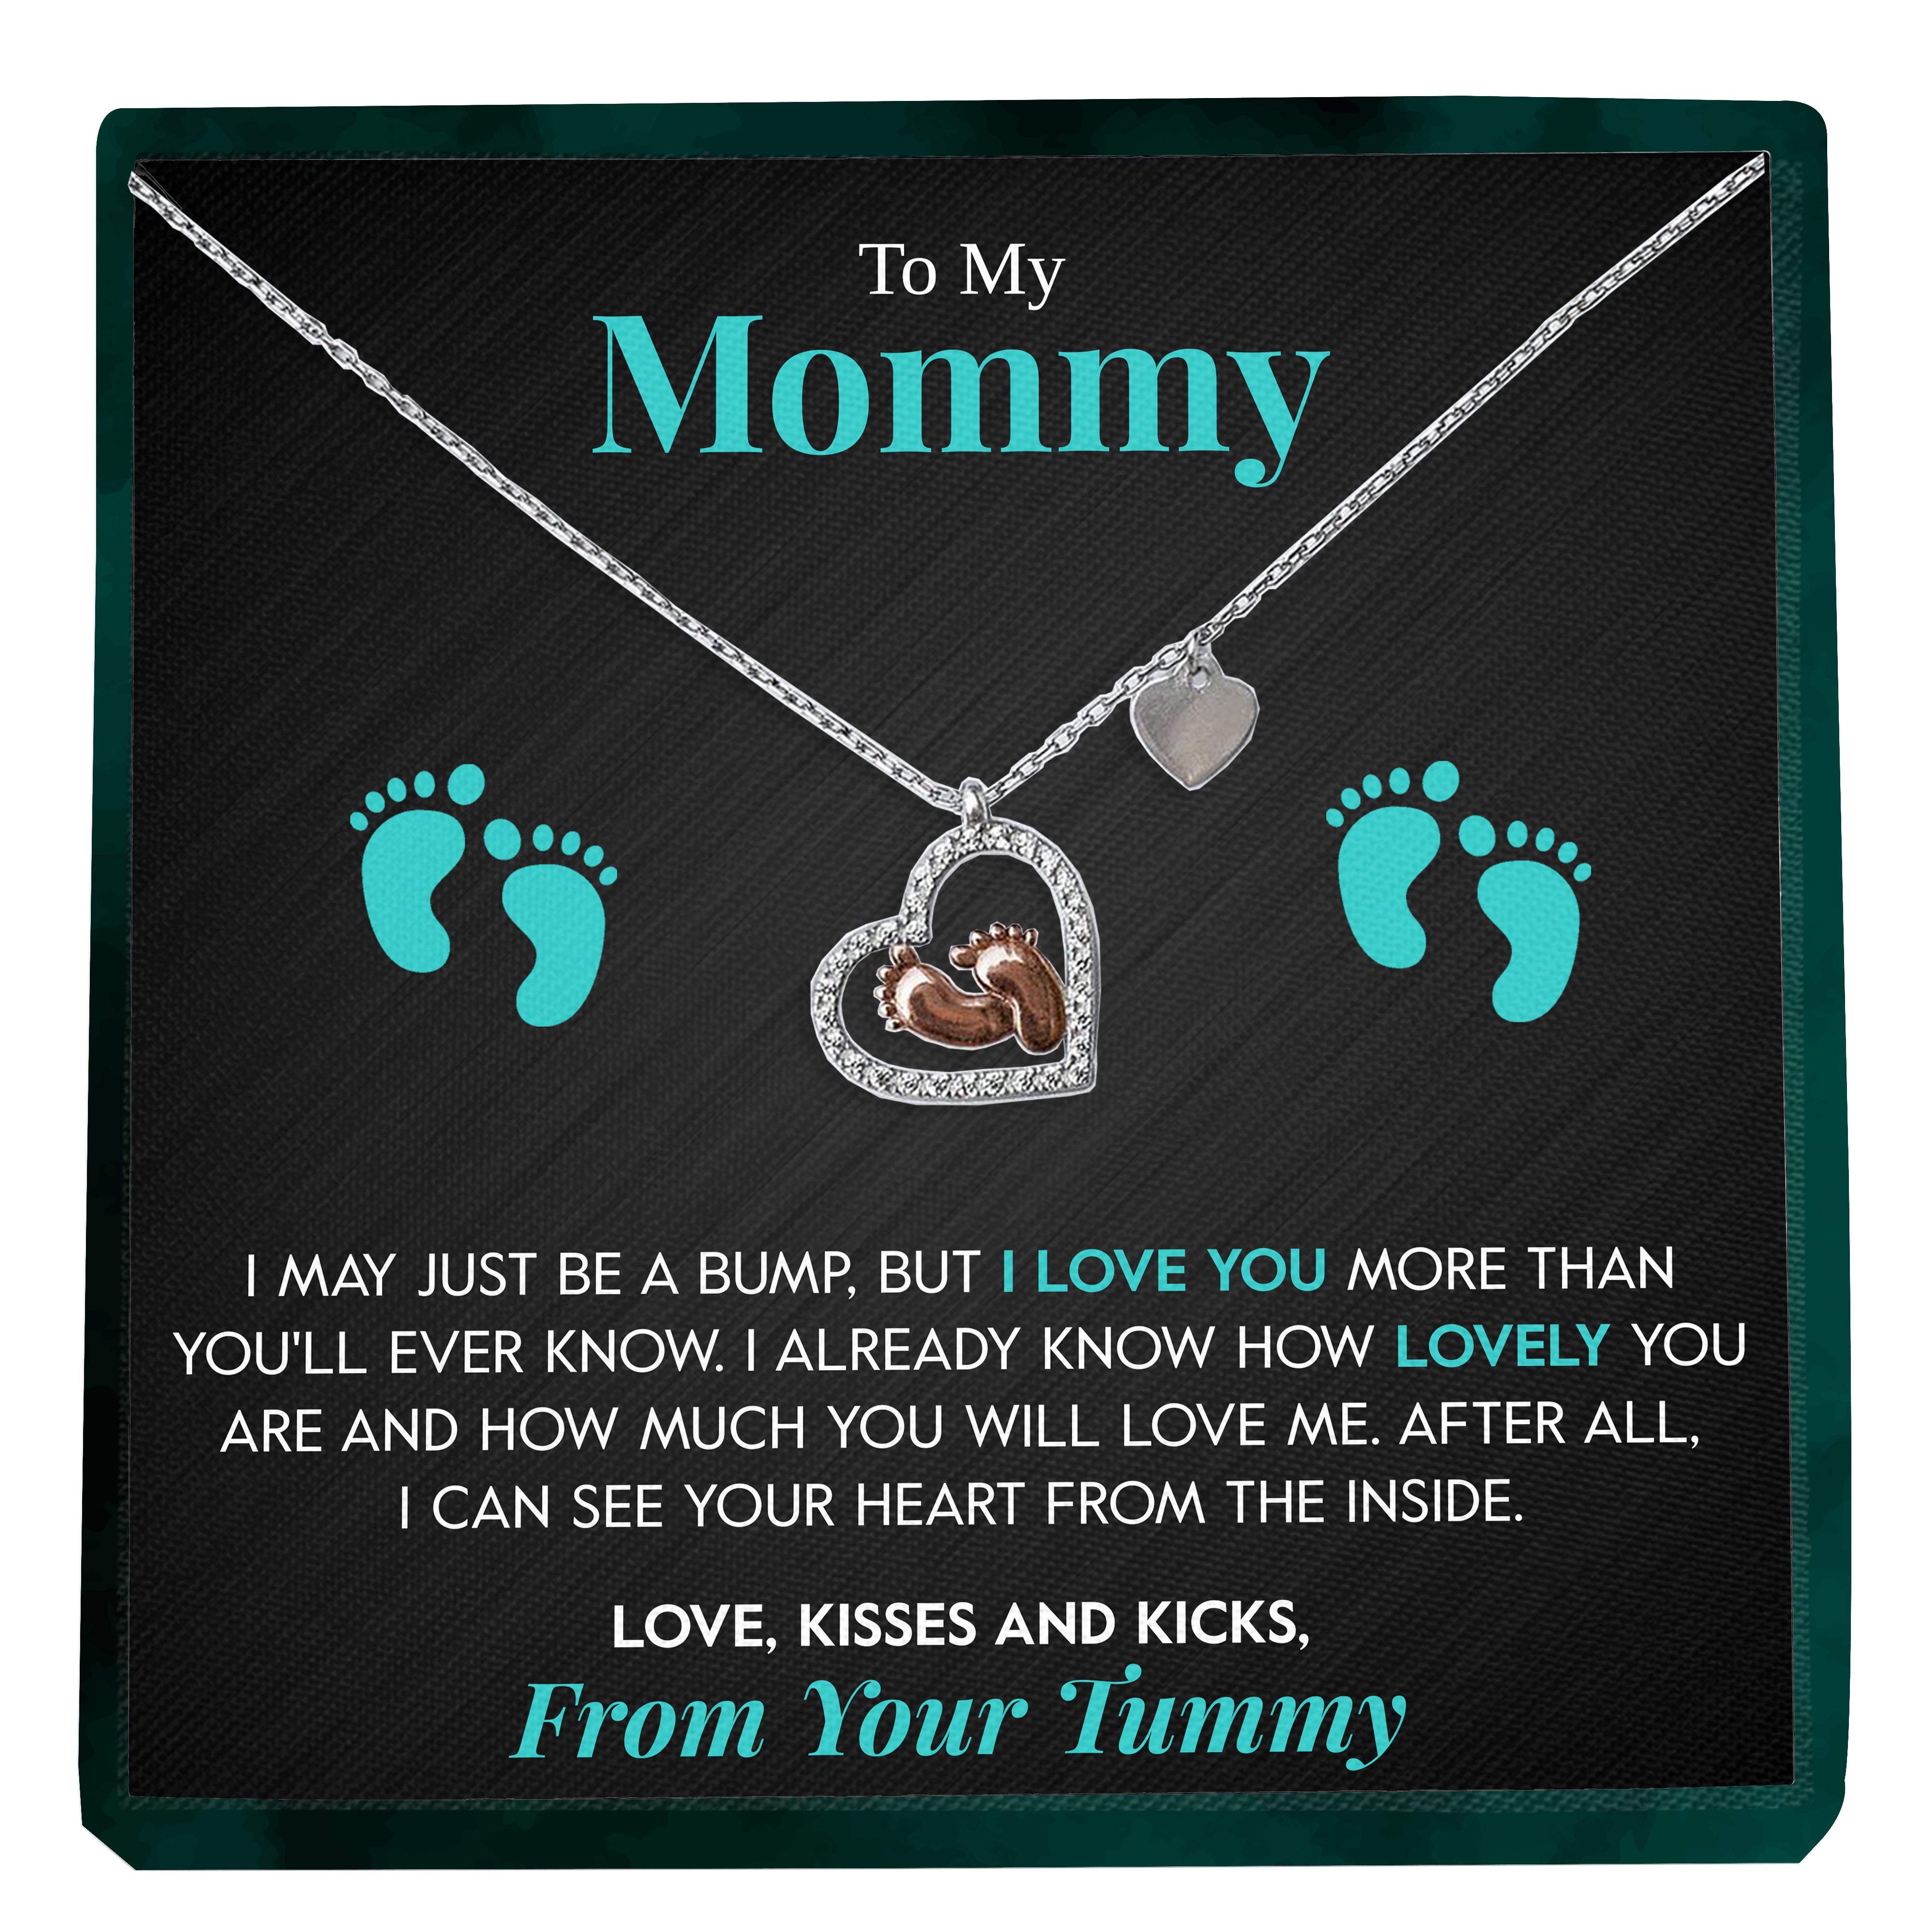 To My Mommy | "Love Kisses and Kicks" | Baby Feet Necklace